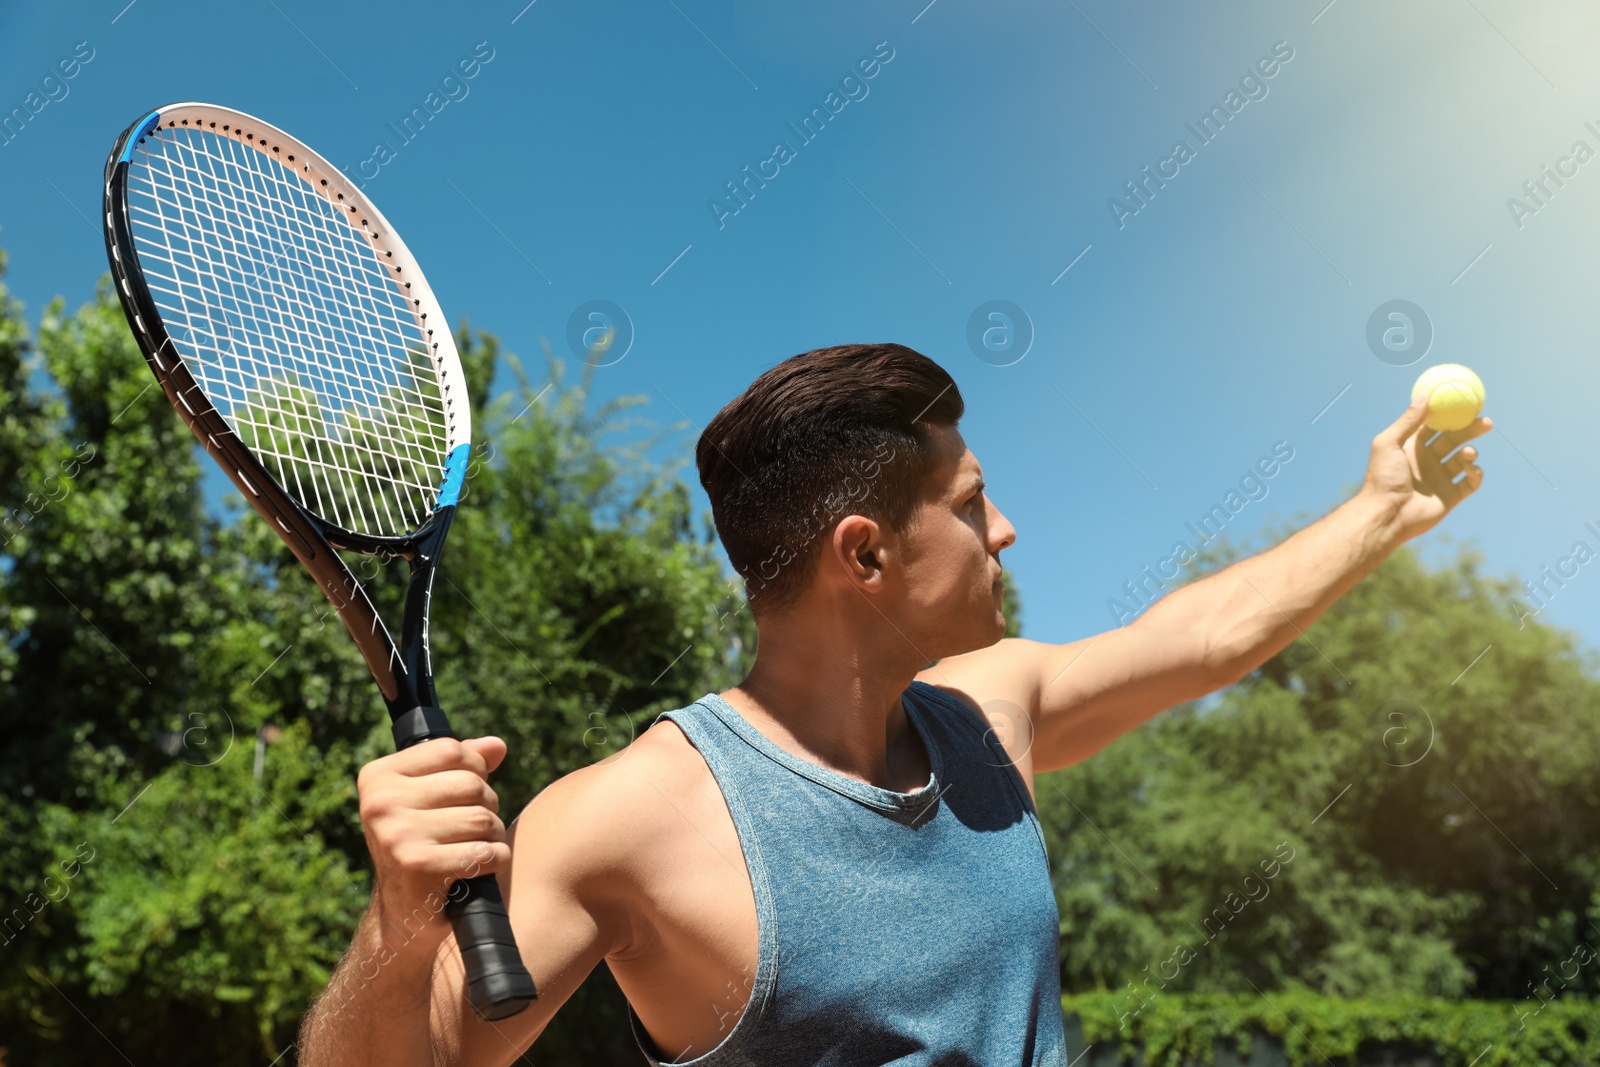 Photo of Man playing tennis in park during sunny day